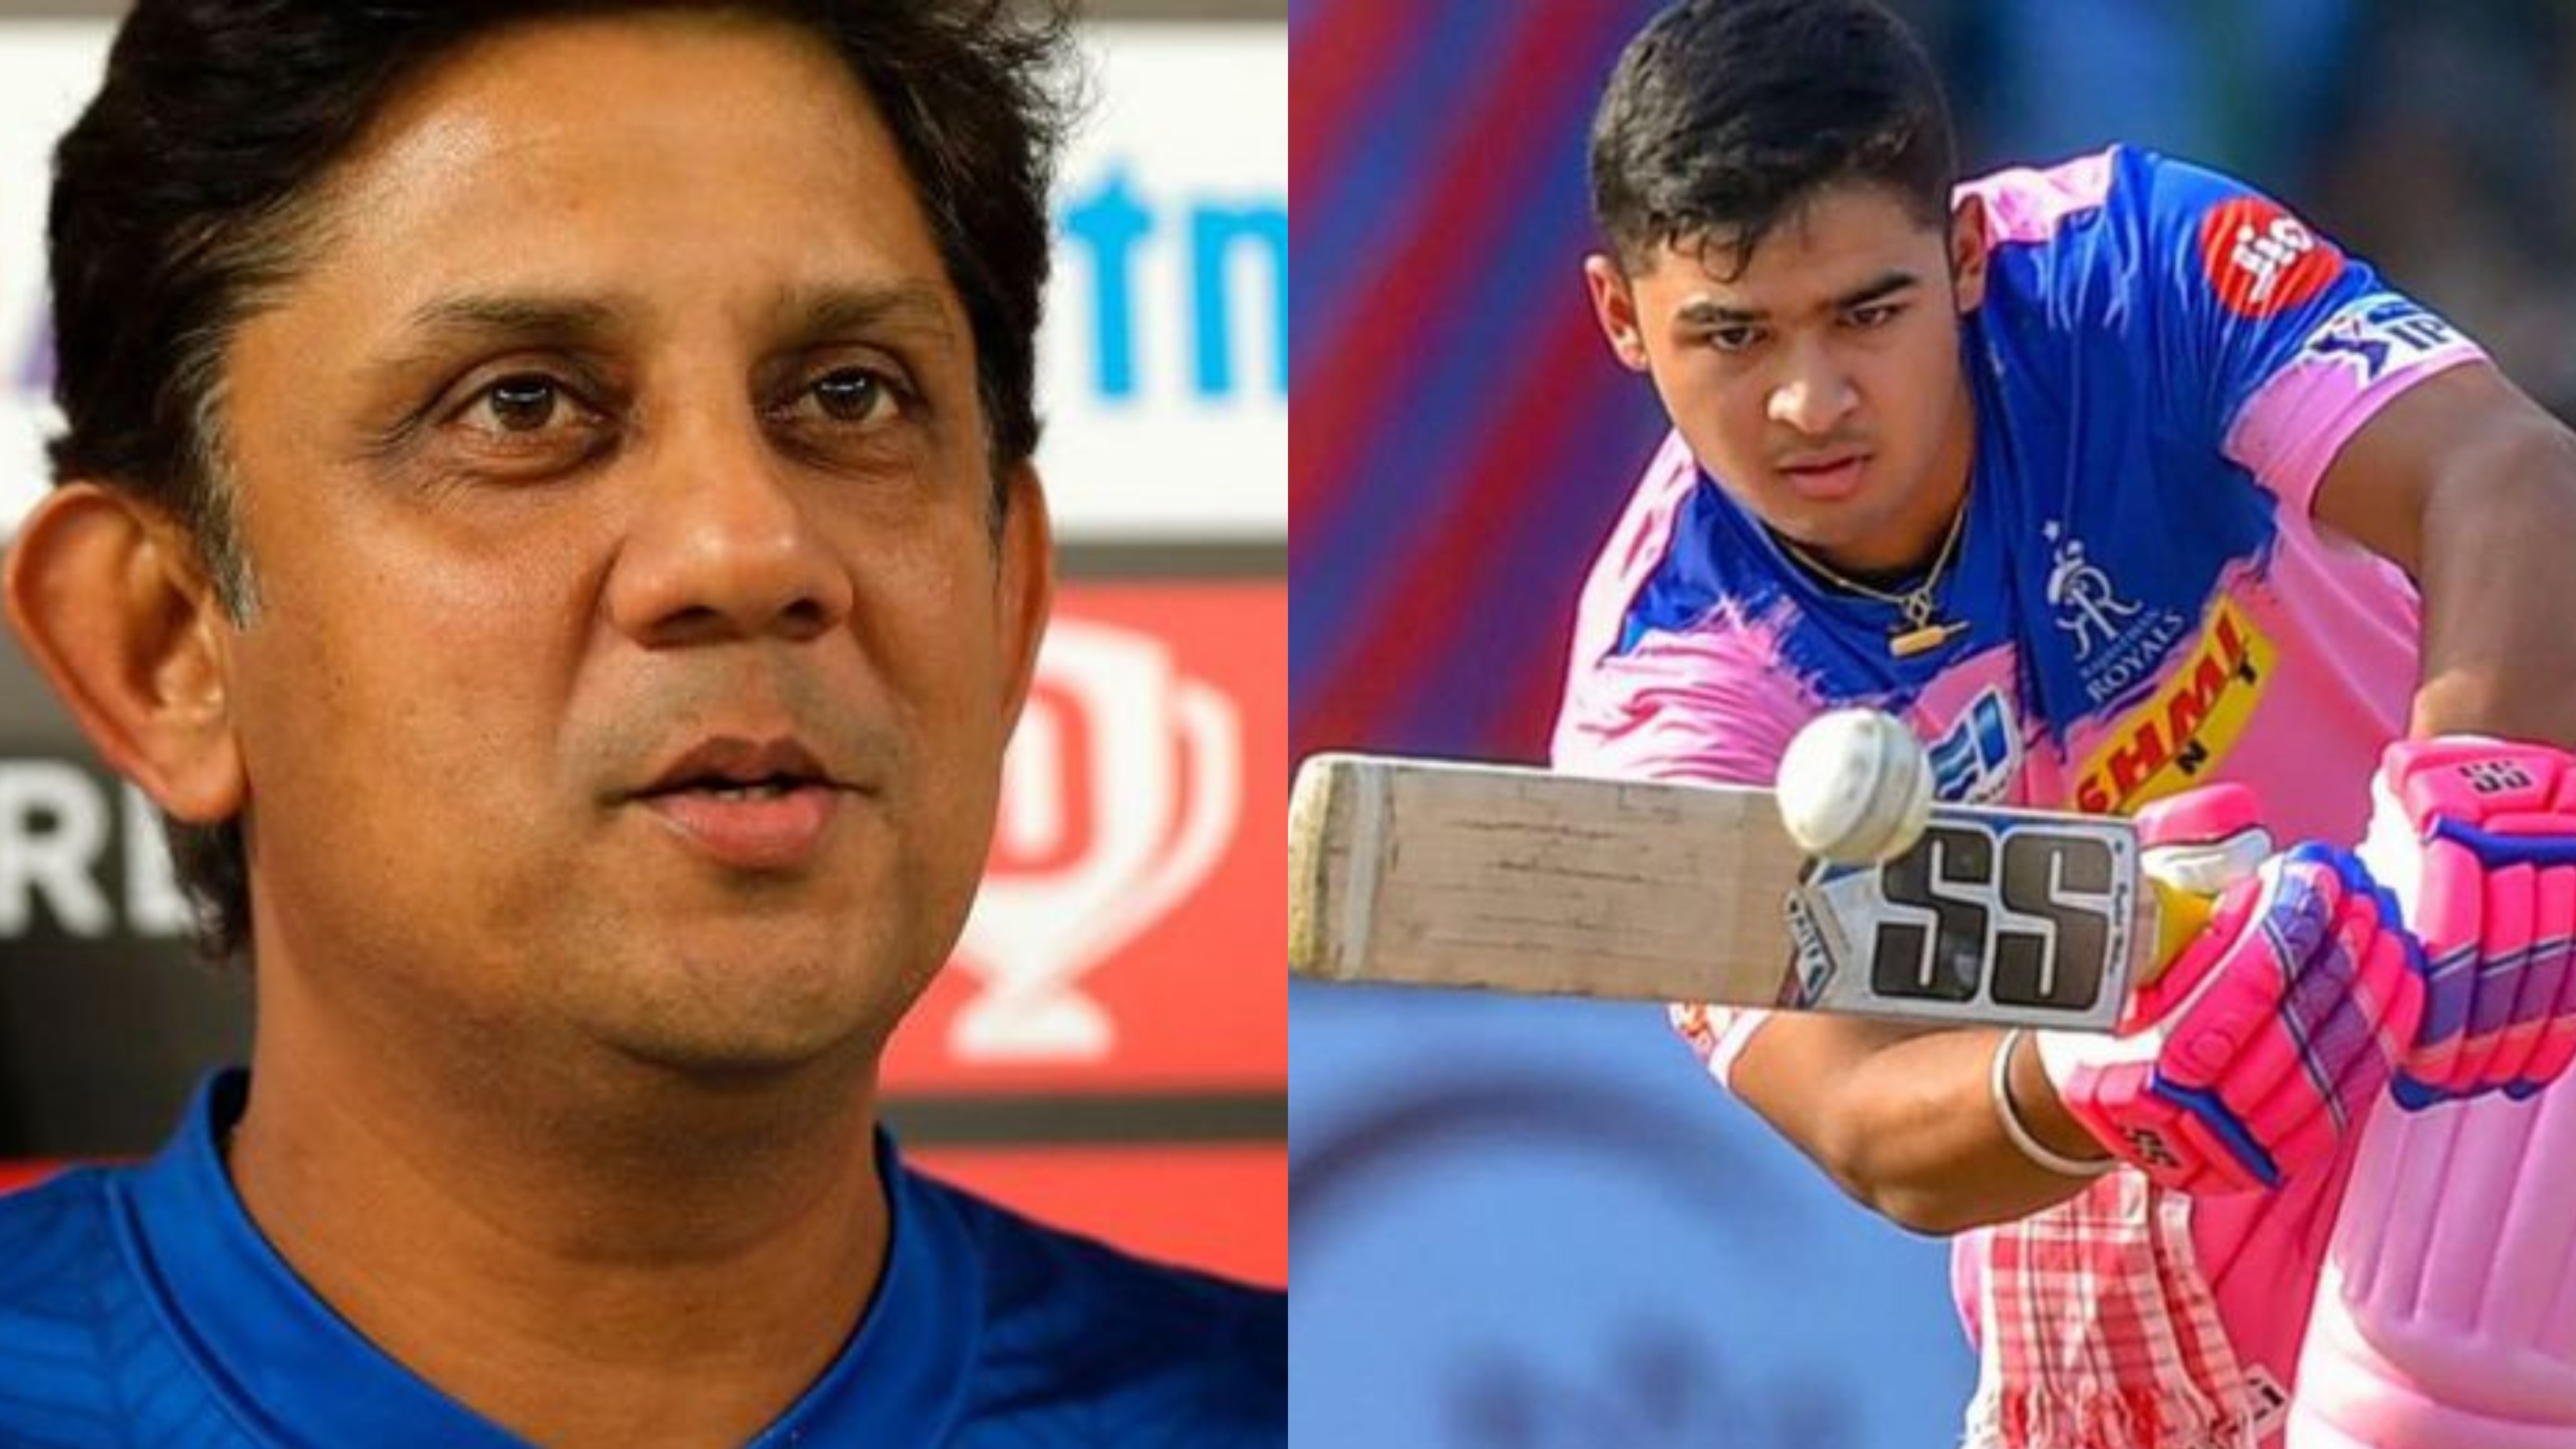 IPL 2020: Crucial run out of Riyan Parag could have been avoided, says RR coach Bahutule 